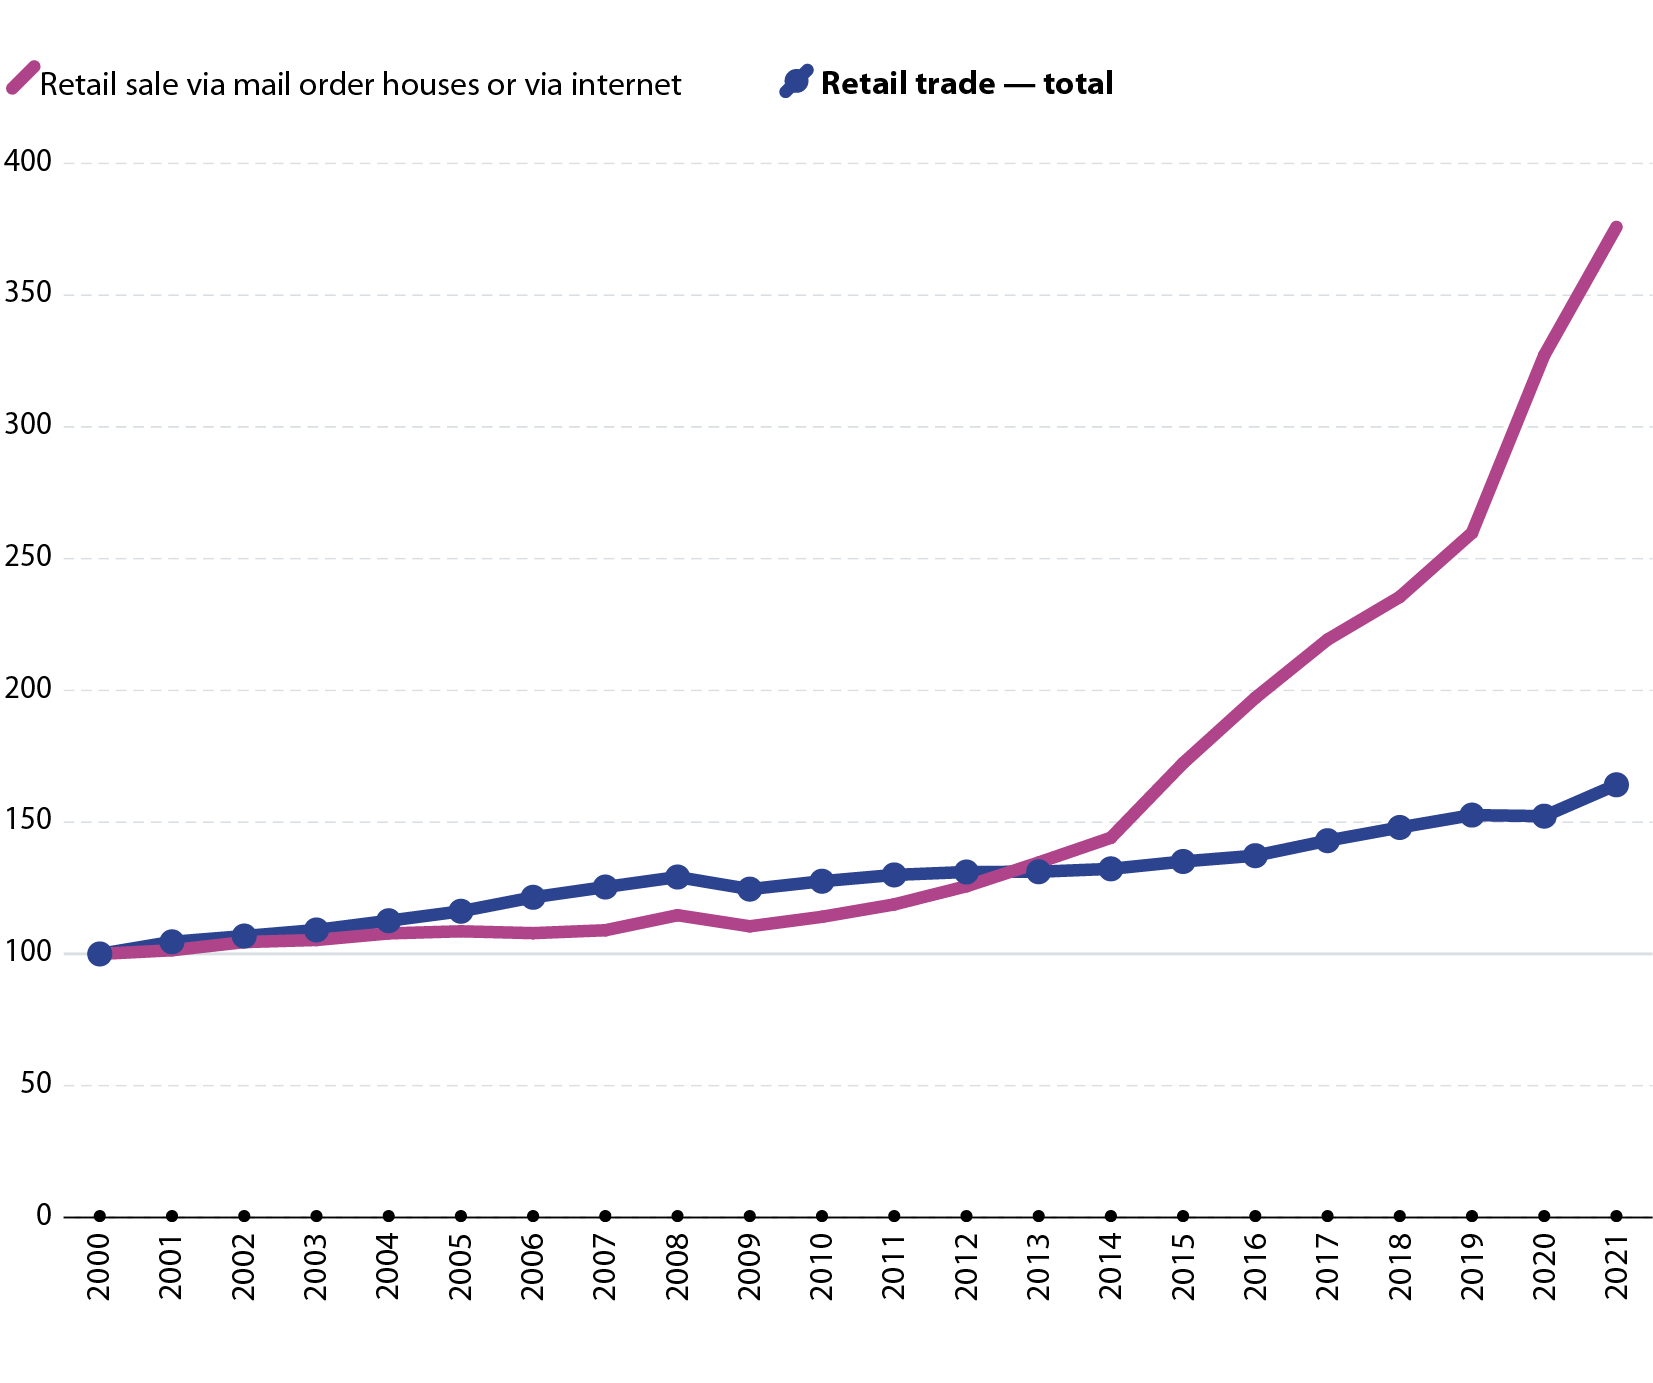 Turnover index. Data for the EU. Annual data for 2000 to 2021. Retail trade total and retail sale via mail order houses or via internet. Line graph.